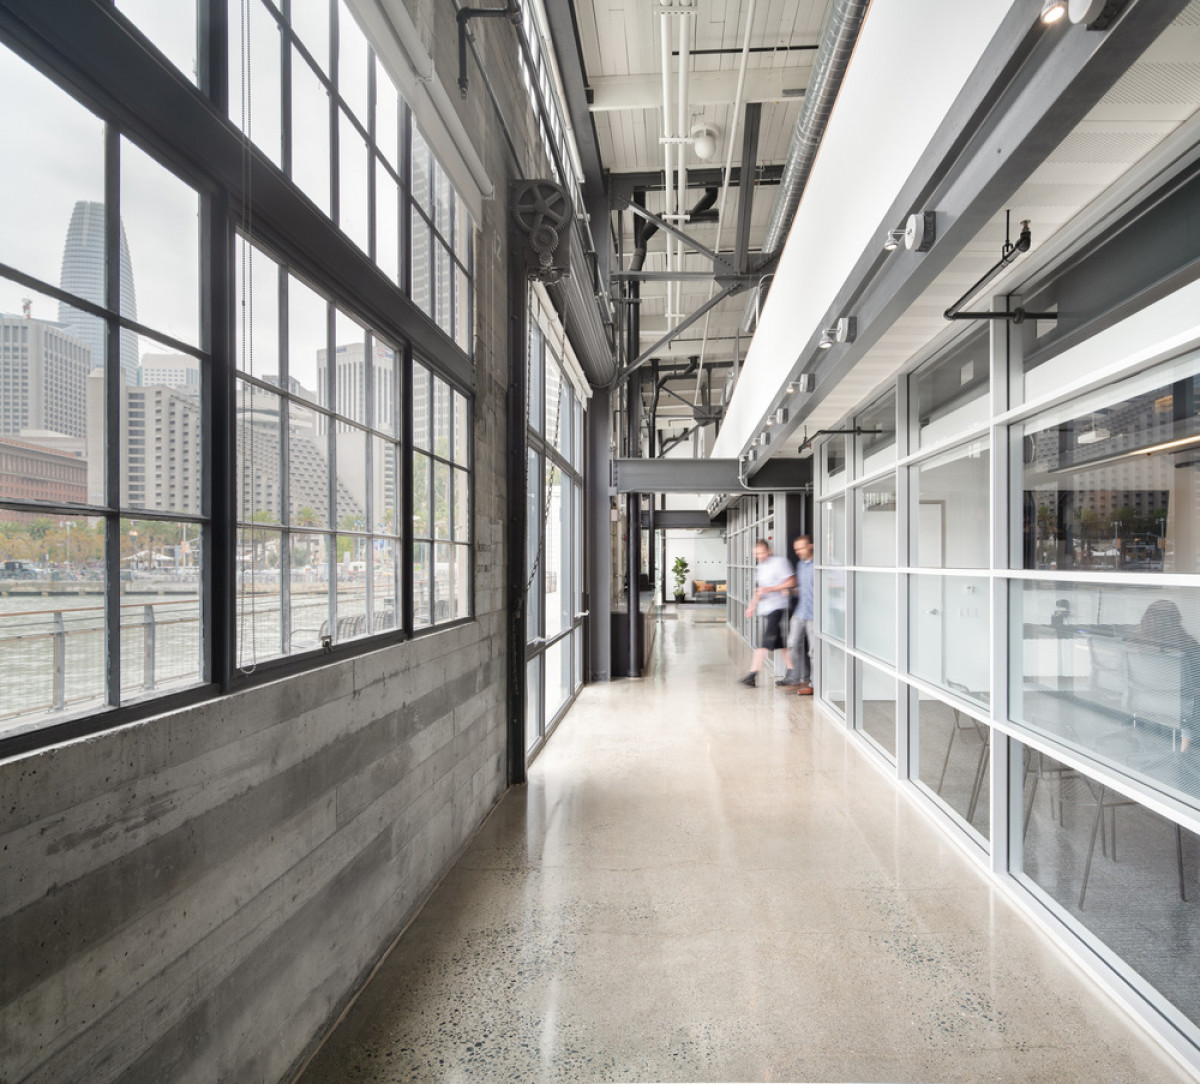 MSG Entertainment: By uncovering and celebrating materials and structures that had been previously ignored or concealed, and re-establishing spatial connections, William Duff Architects (WDA) designed an office that helps facilitate the impromptu interact